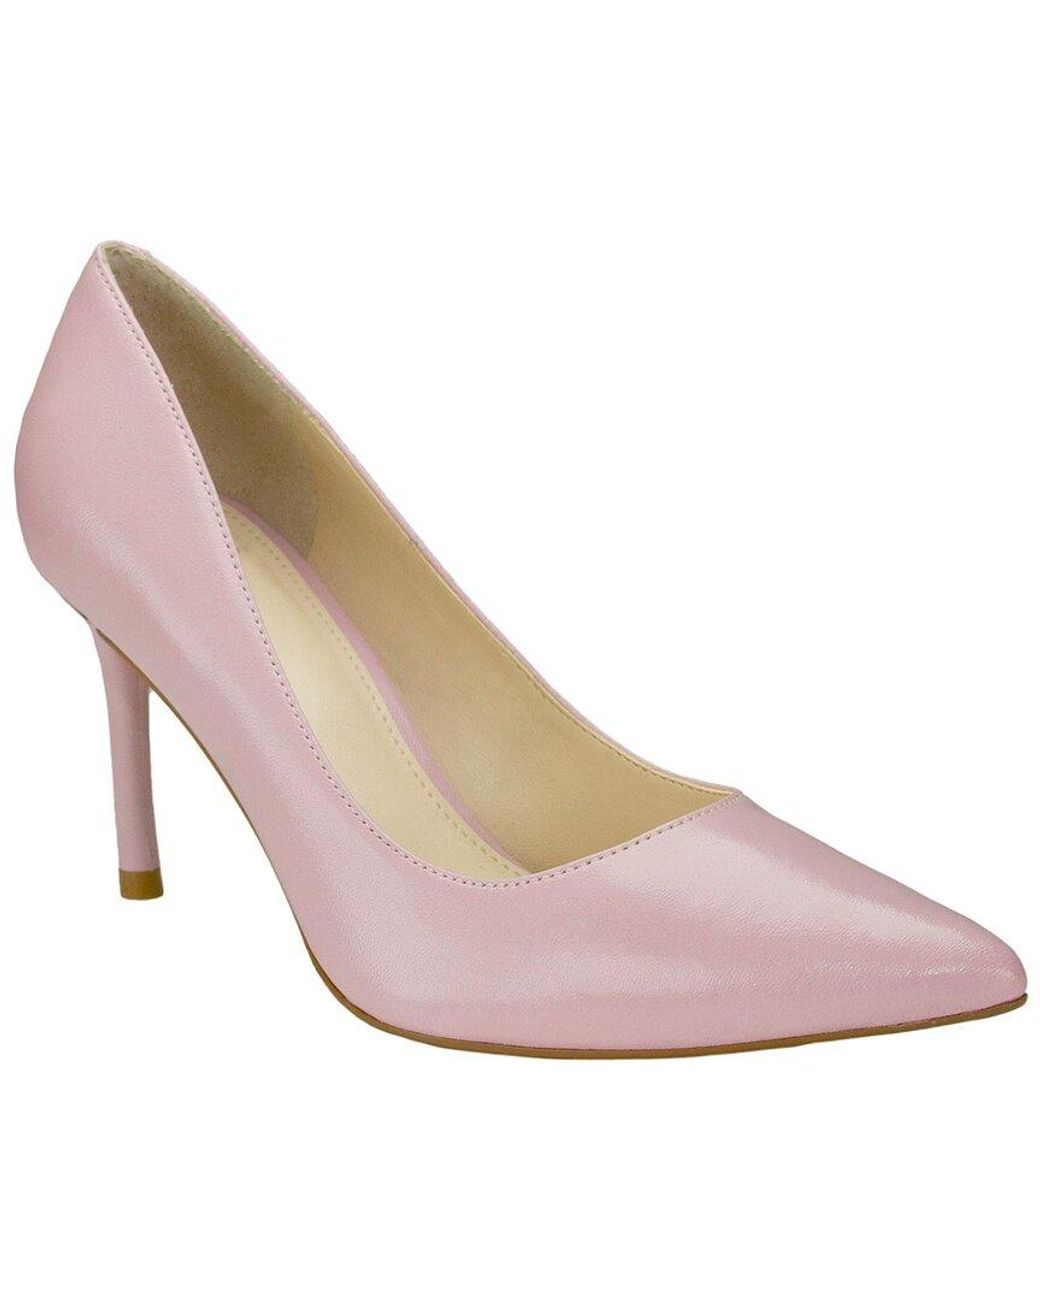 Marc Fisher Salley Leather Pump in Pink | Lyst Canada